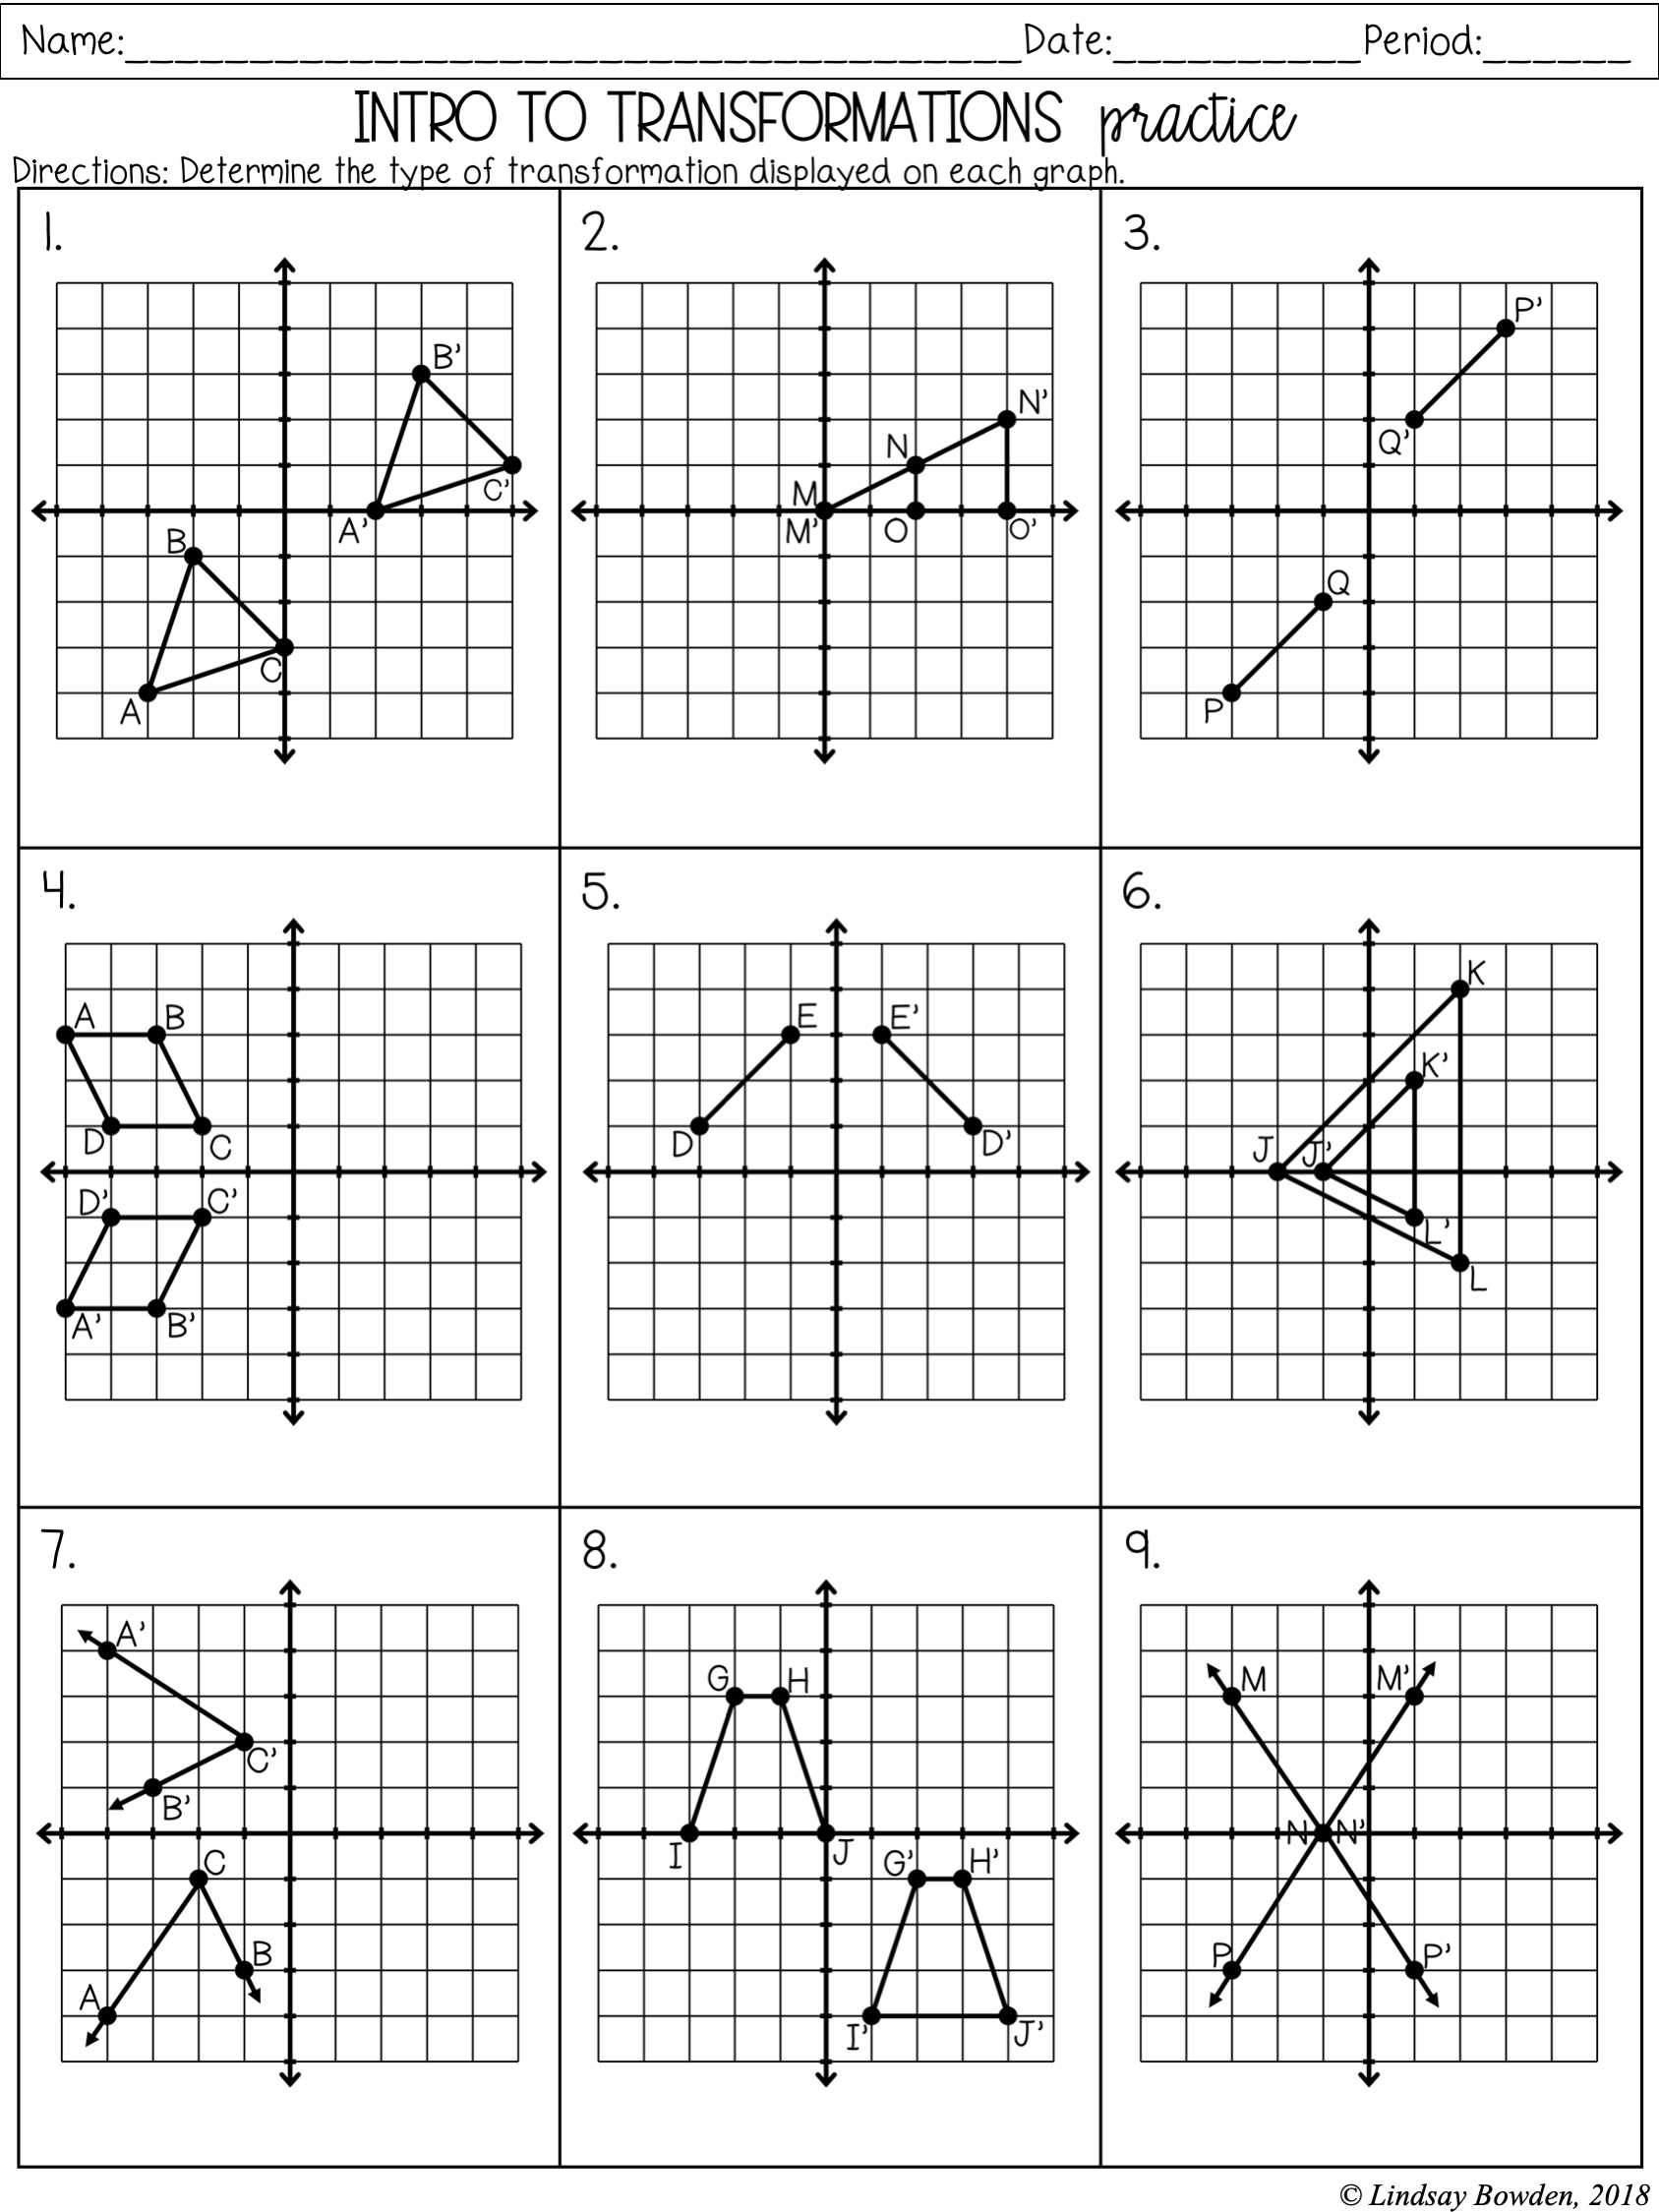 Transformations Notes and Worksheets - Lindsay Bowden For Dilations Translations Worksheet Answers